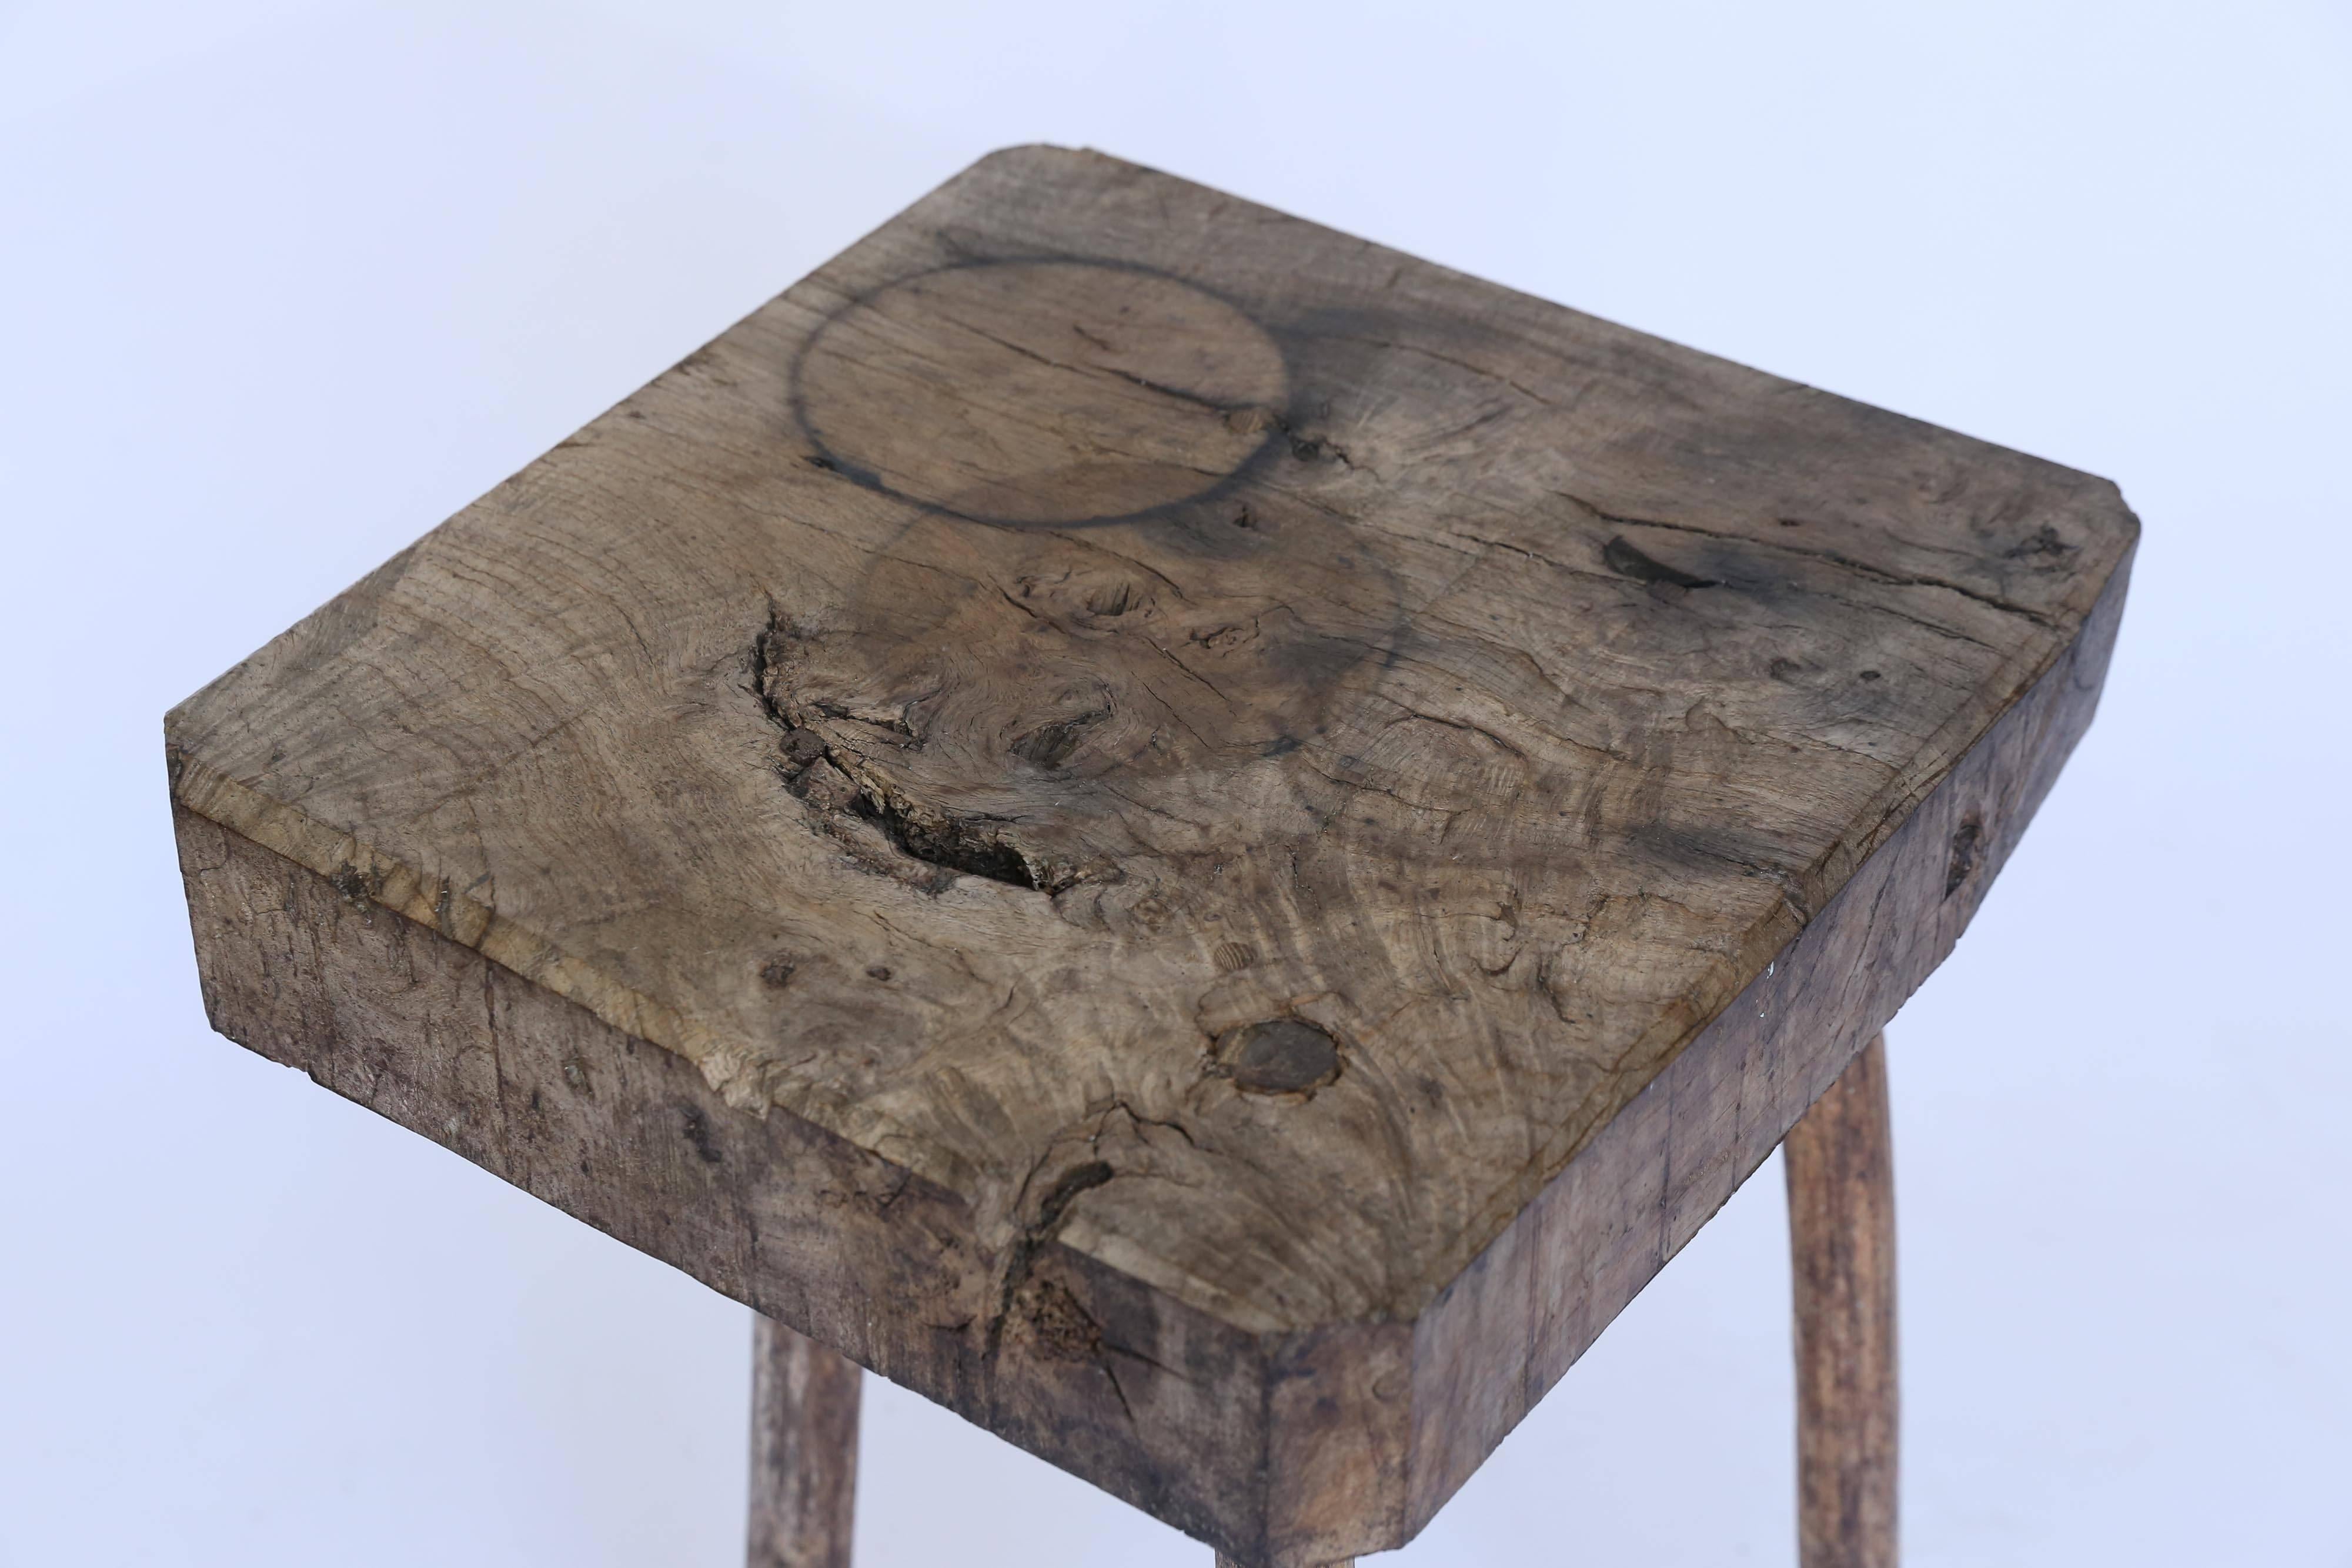 A quirky rustic three-legged table found in France. Heavy and amazingly sturdy, a treat for the eye from every angle. The 3 inch thick top is the focal point where, along with the natural interest of the wood, the end of one of the legs is apparent